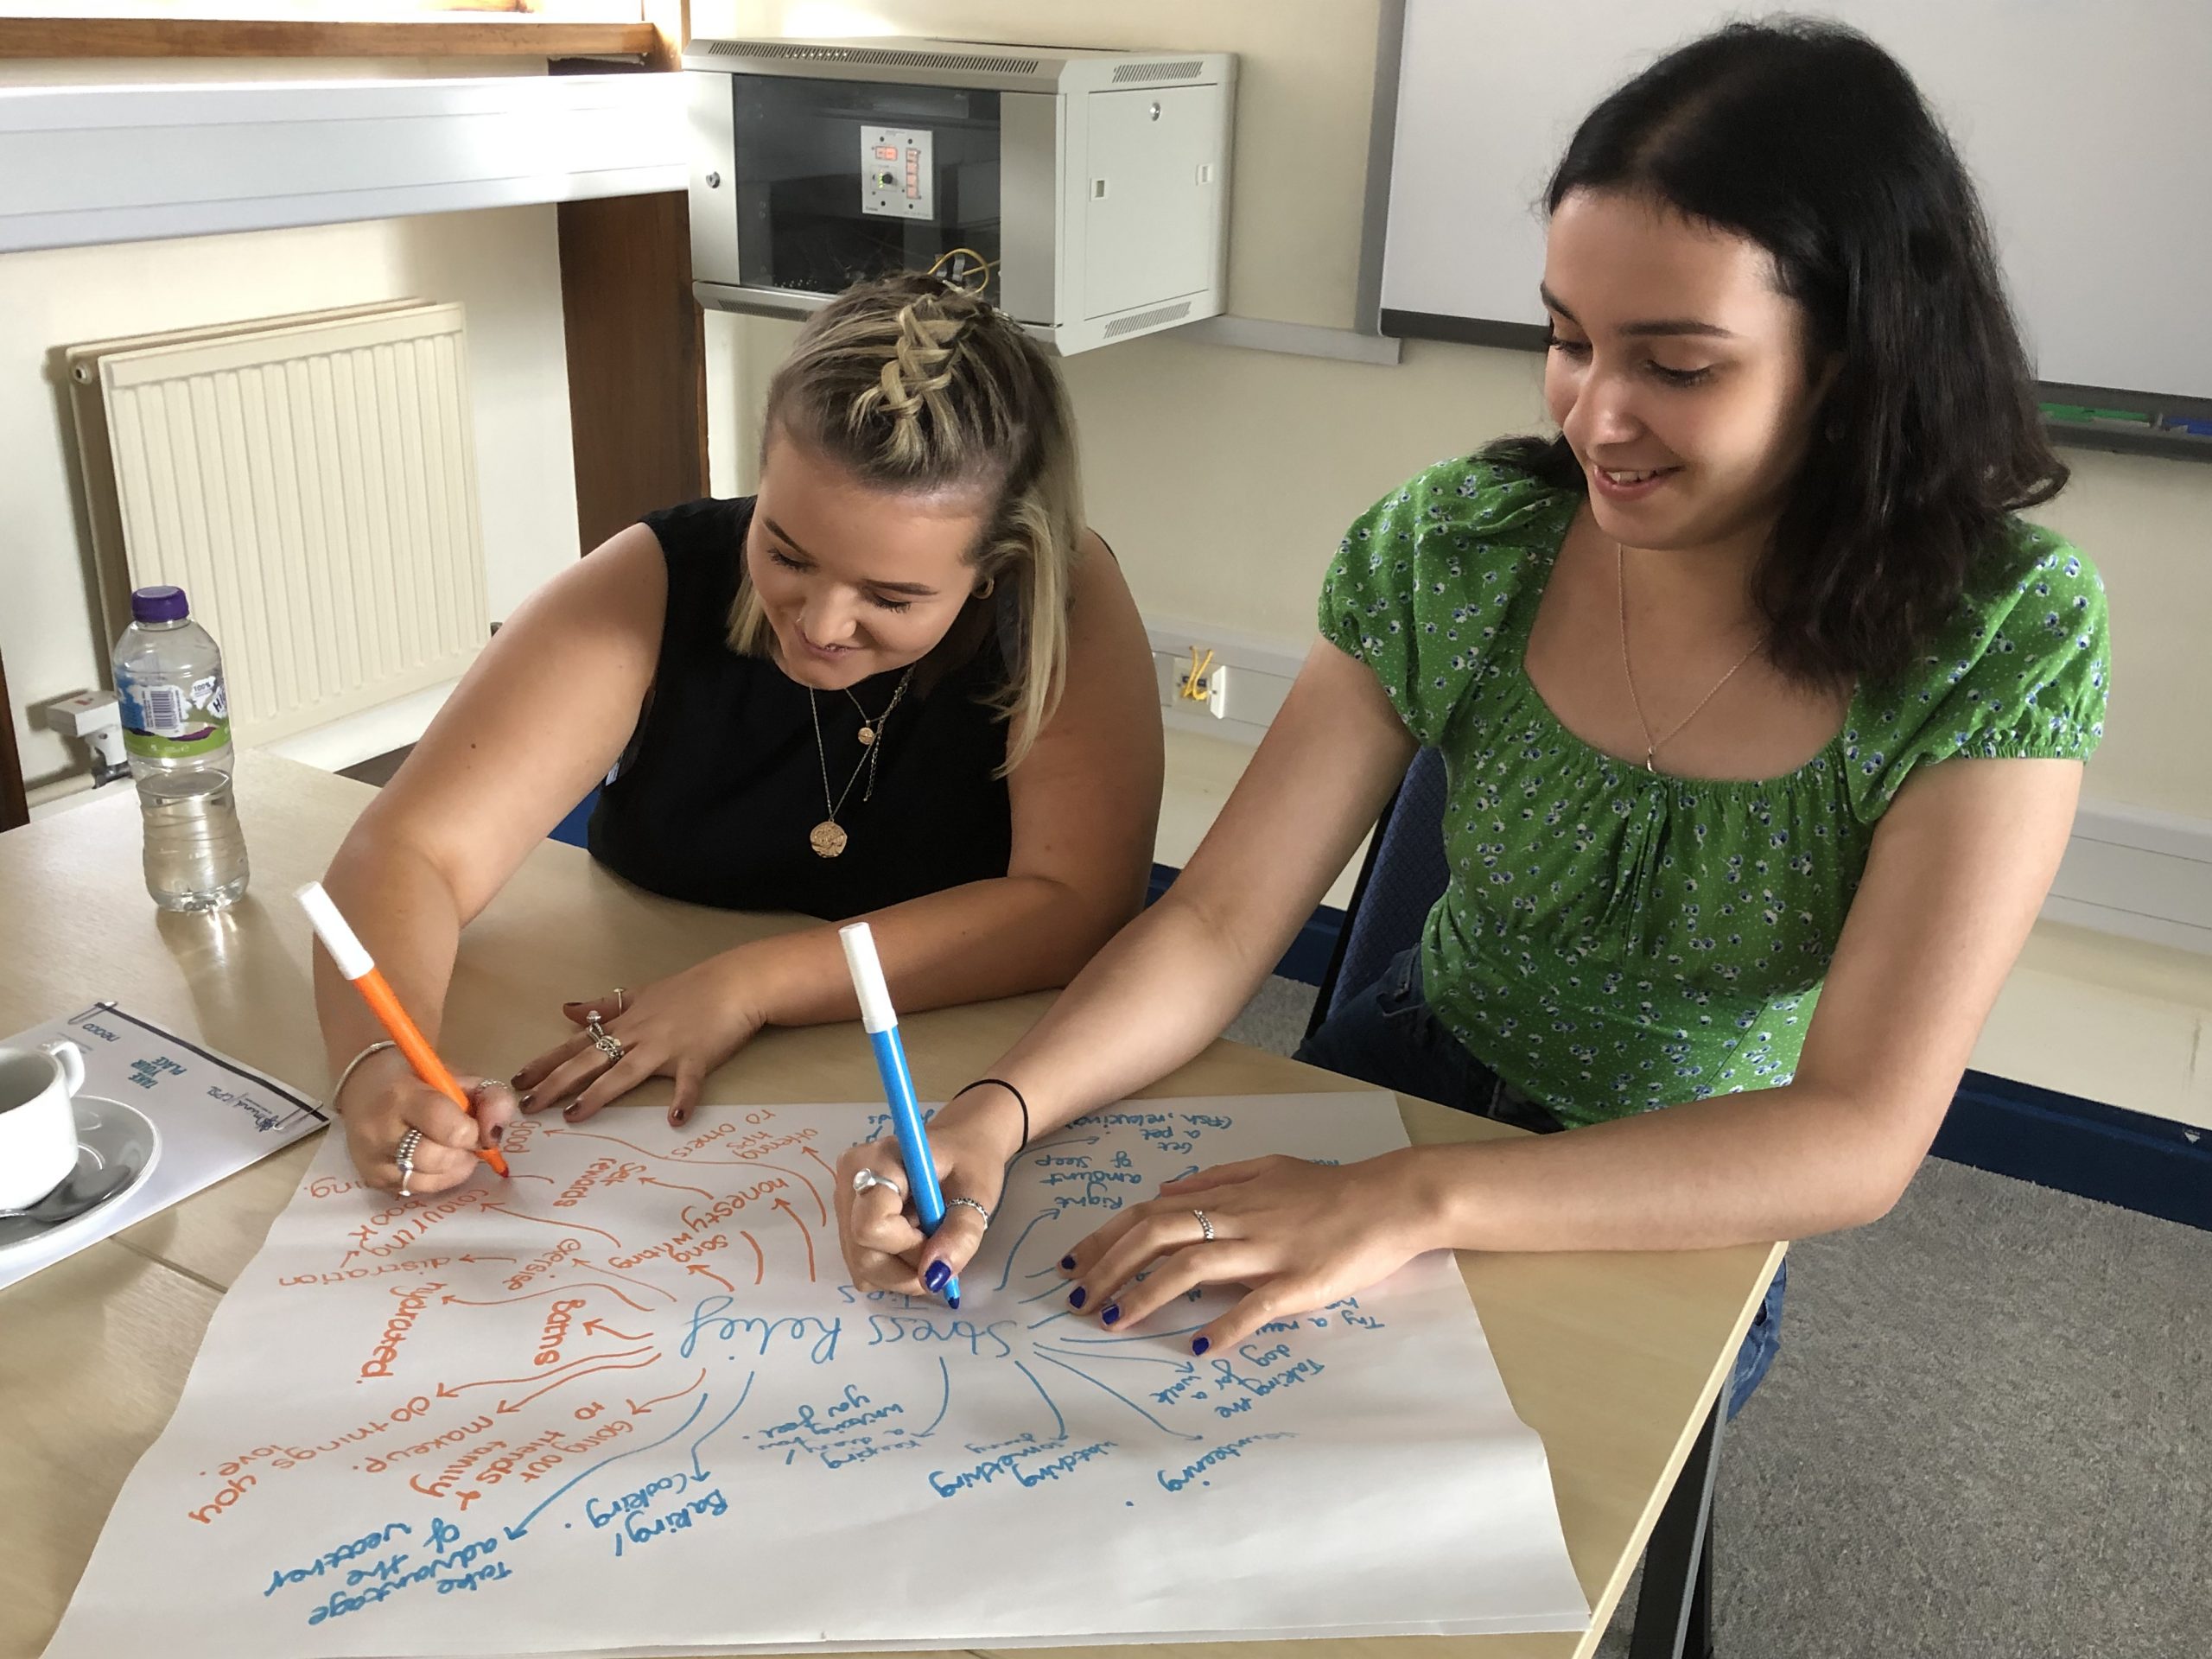 Two women drawing a spider diagram